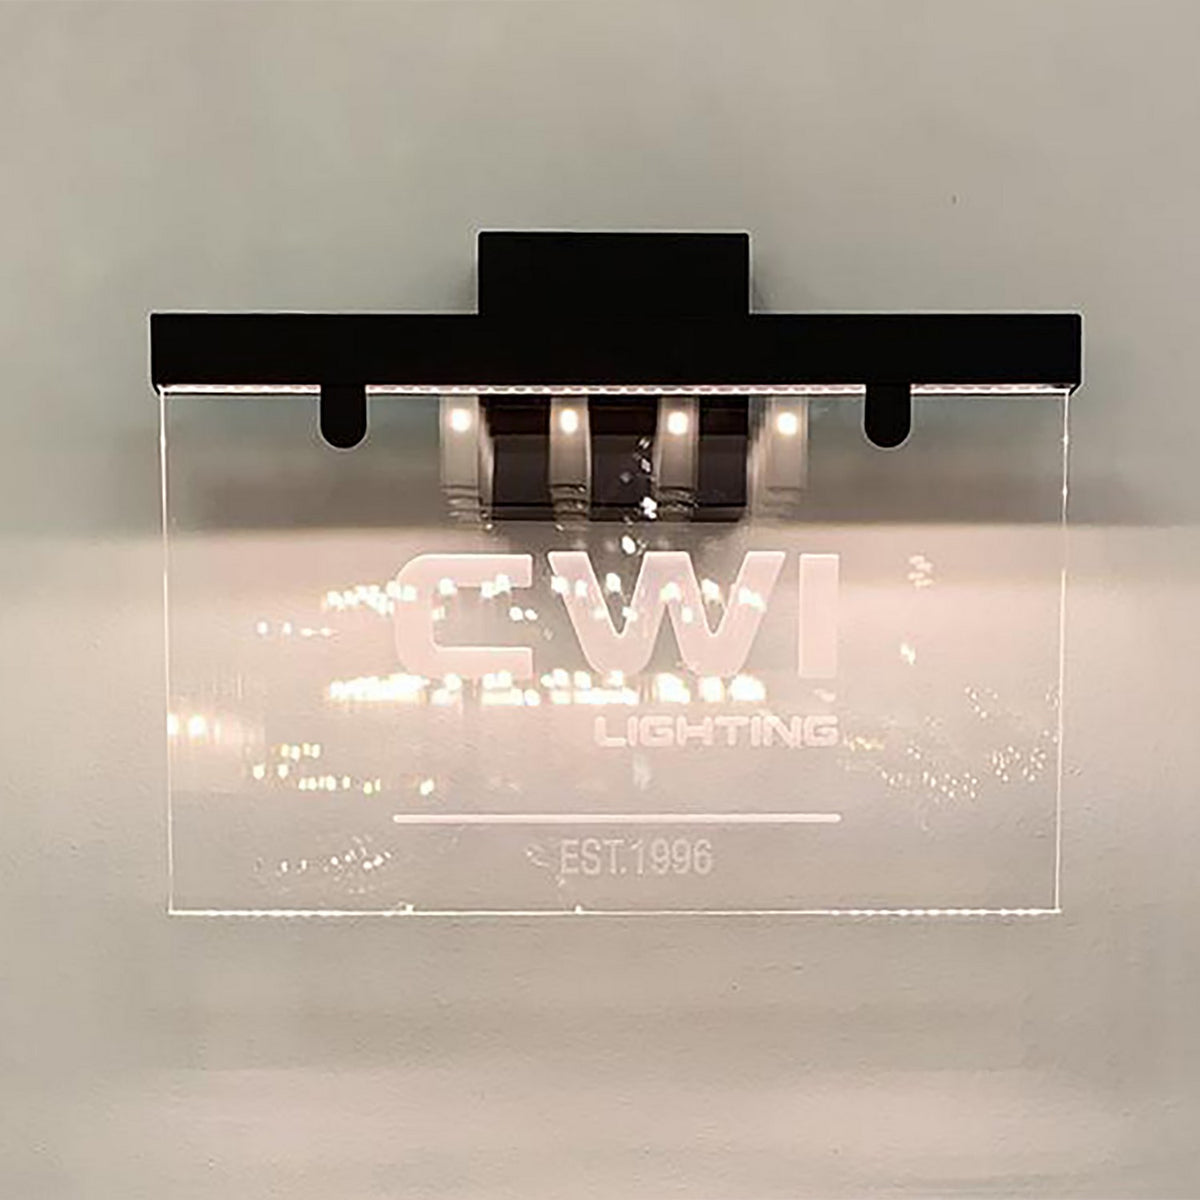 CWI Lighting - 1259C16-101 - Ceiling Sign - CWI Lighting